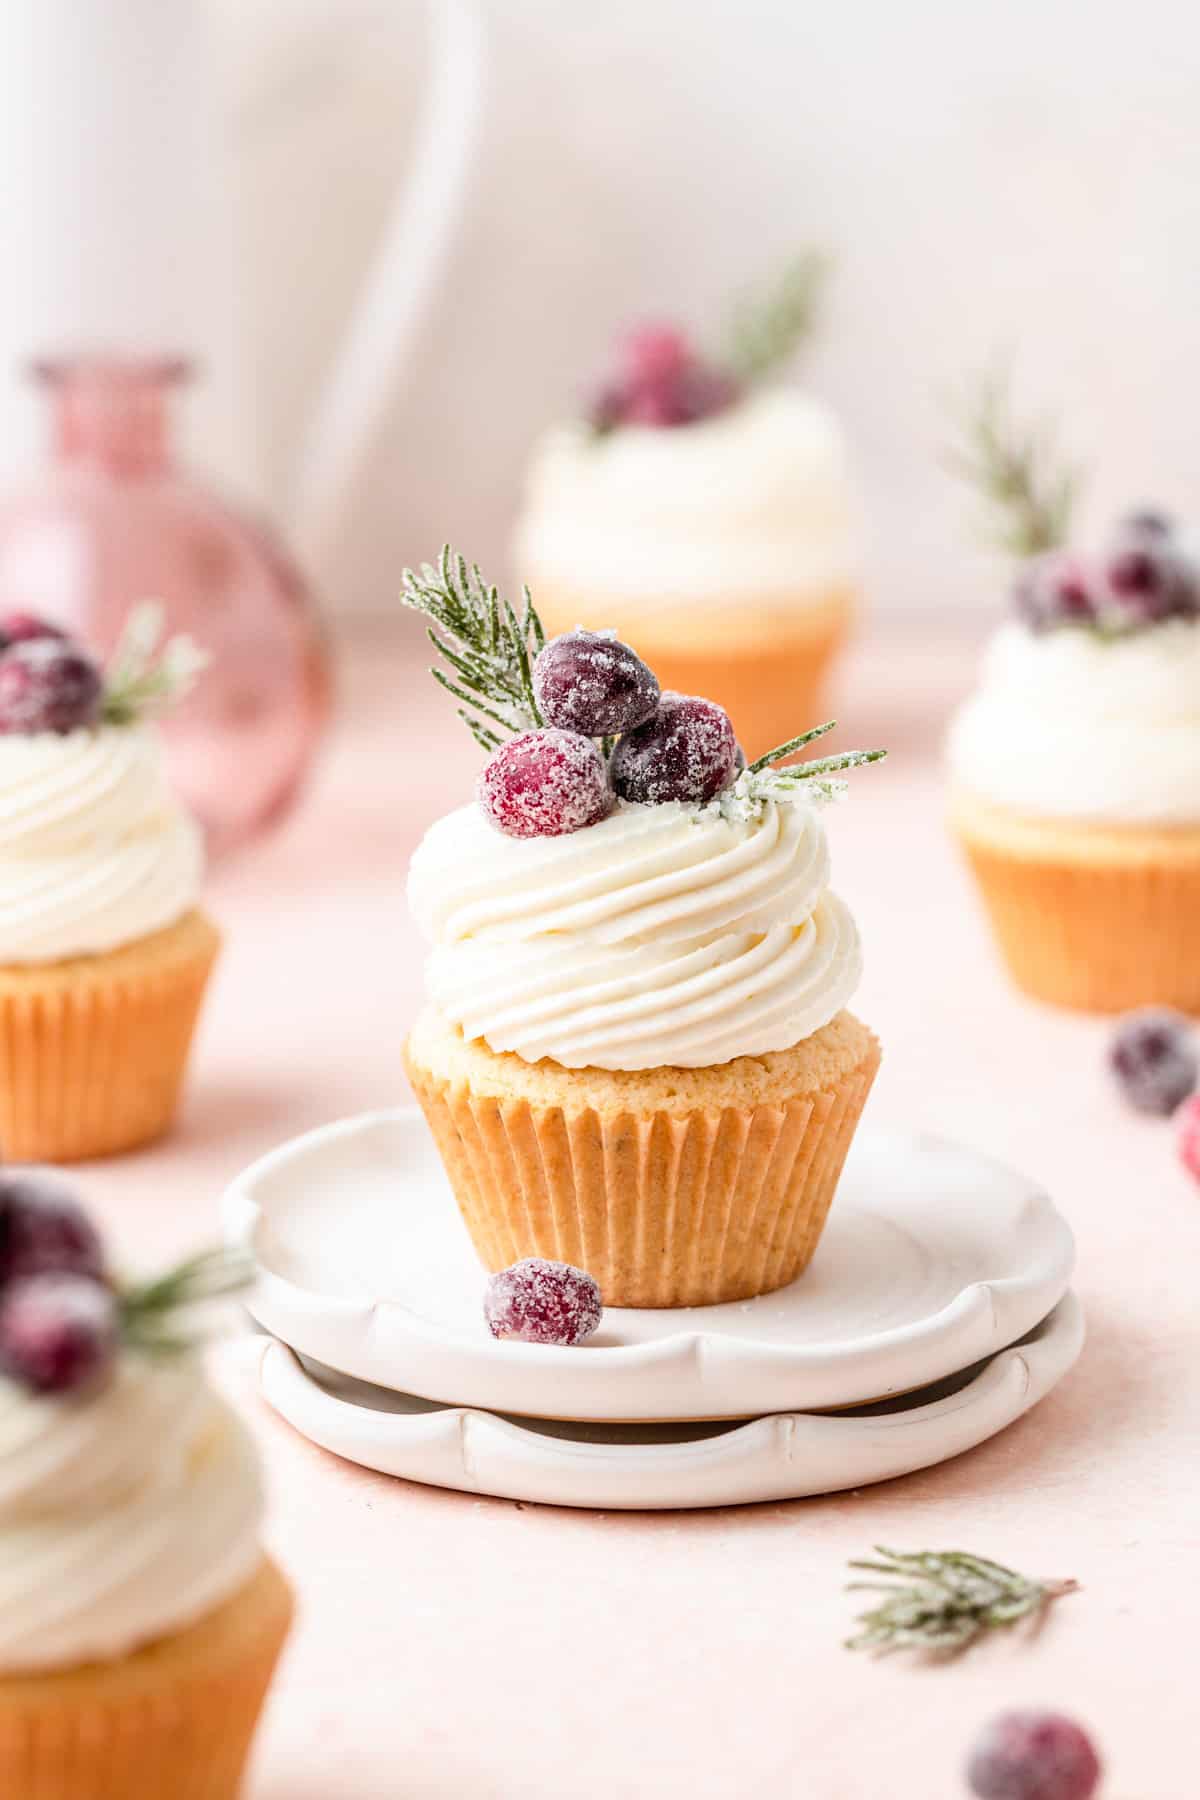 cranberry white chocolate cupcakes filled with cranberry sauce.